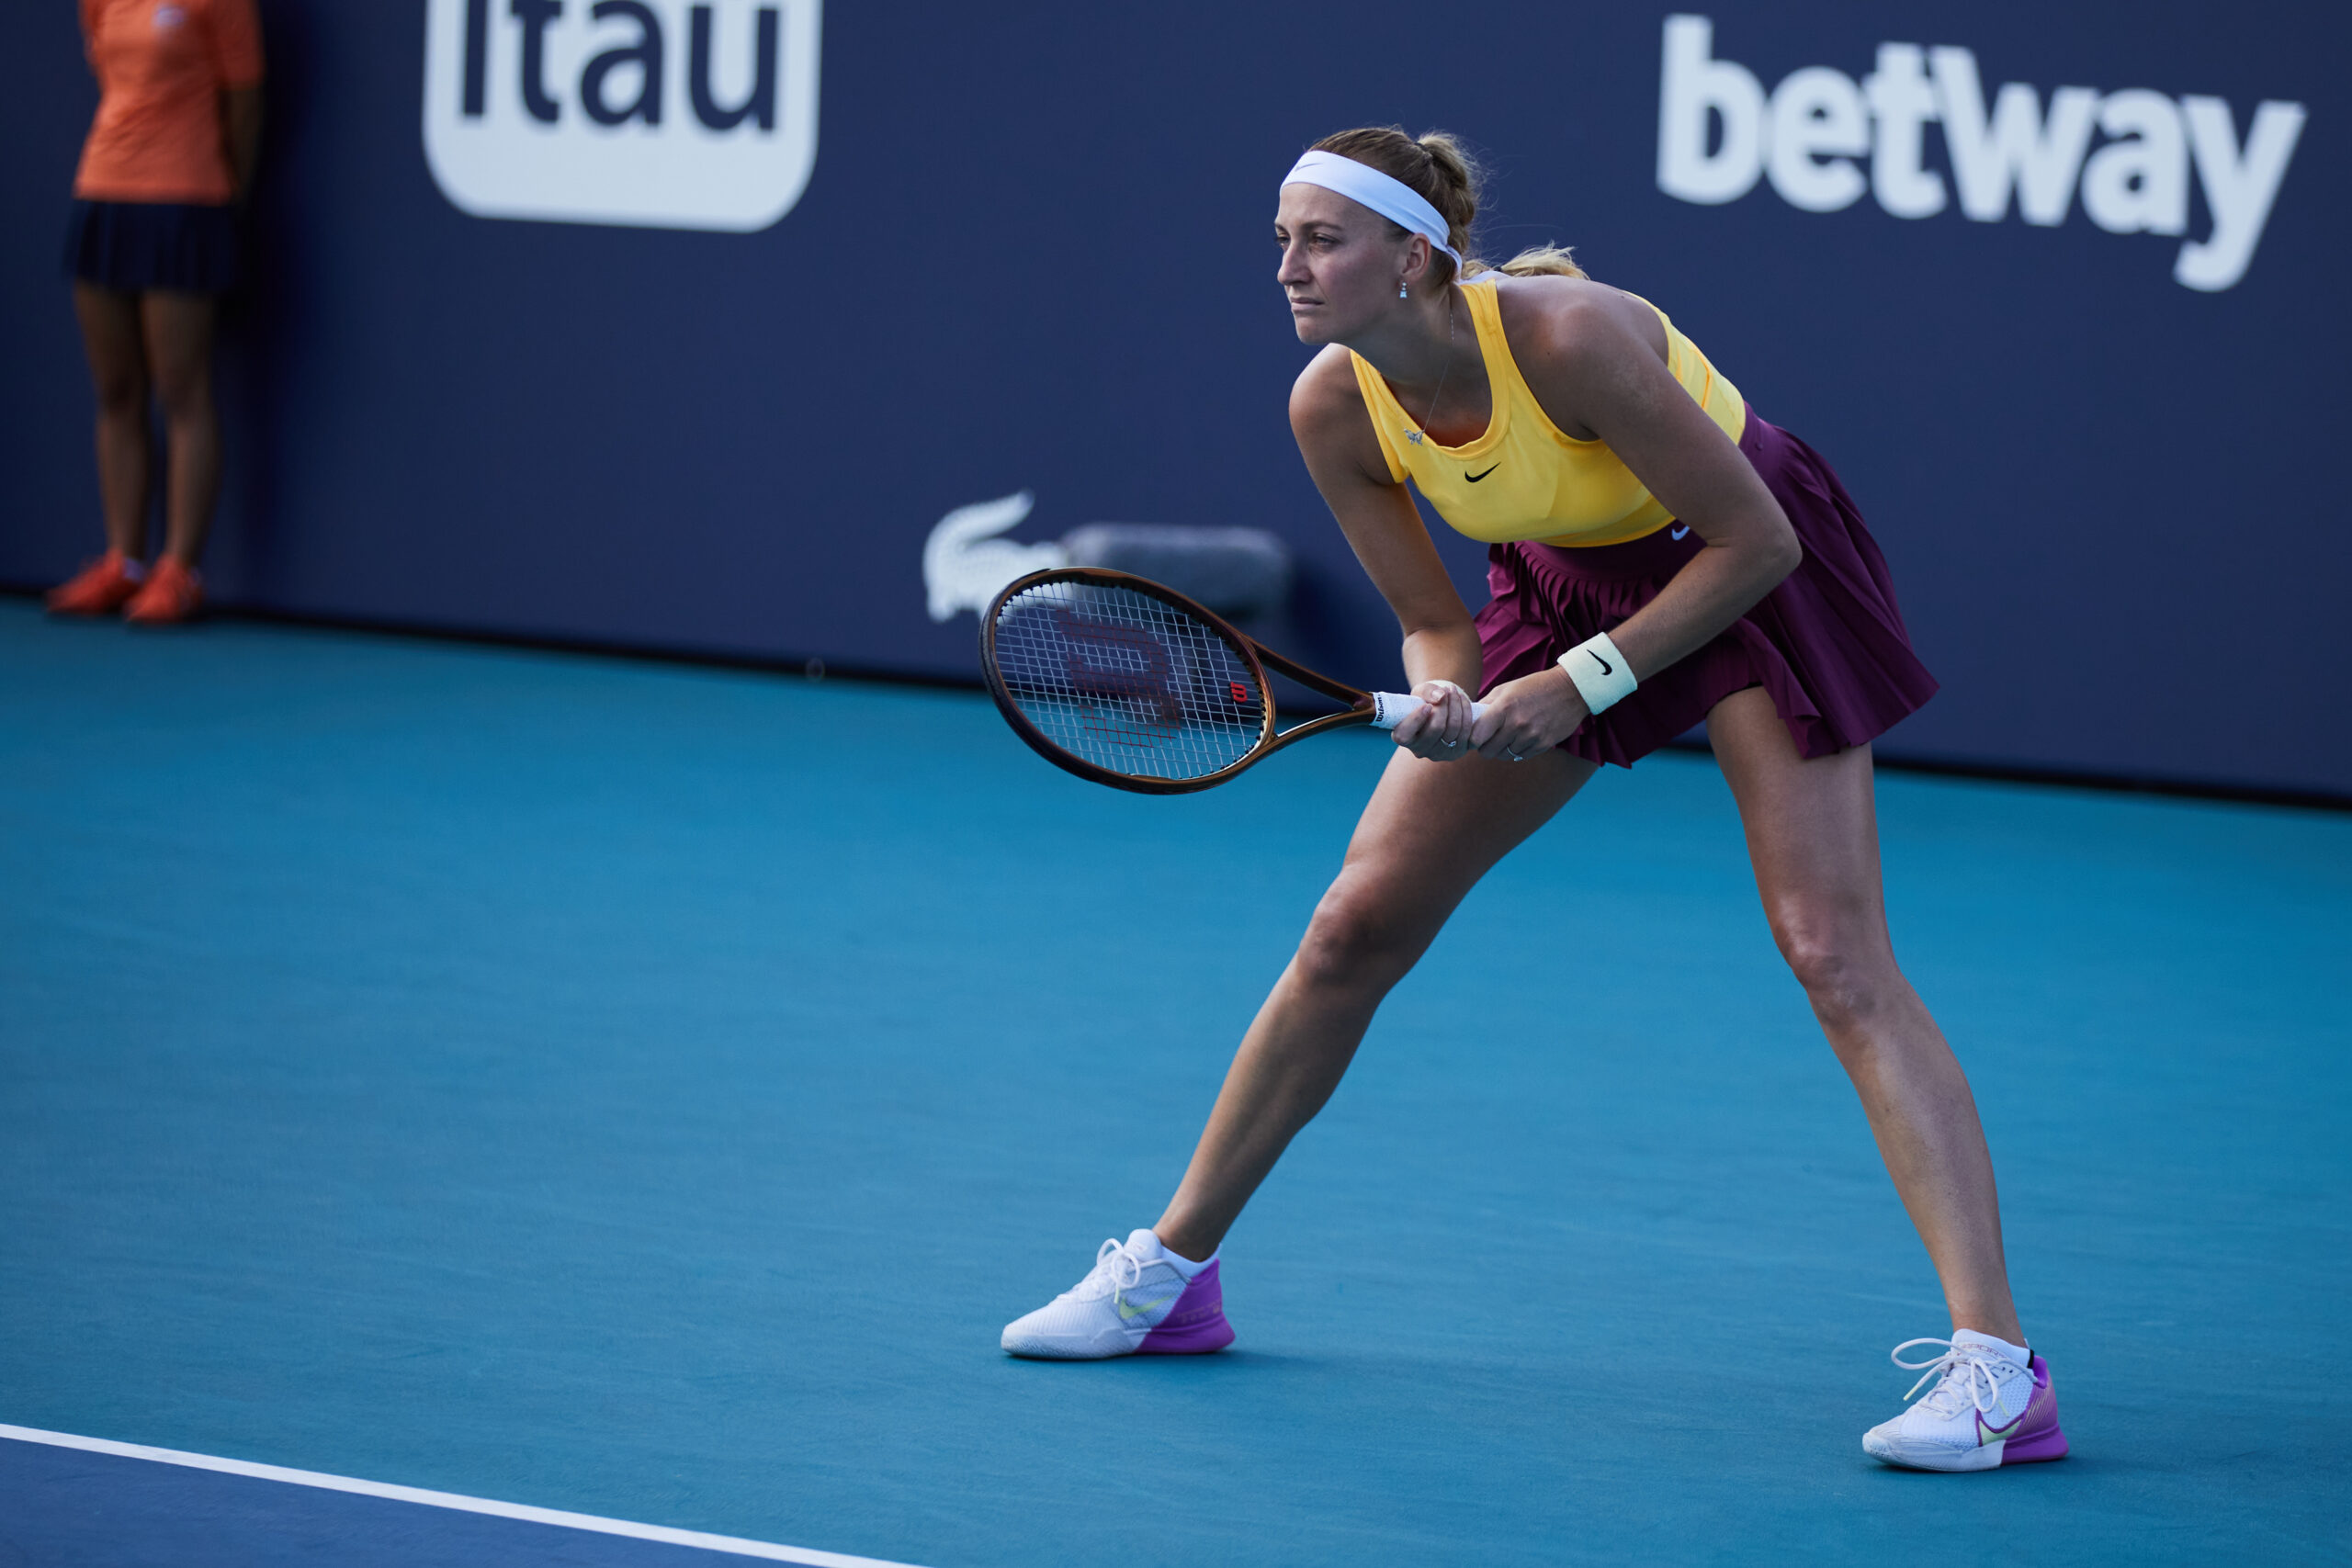 Petra Kvitova during her match against Donna Vekic on March 26 at the 2023 Miami Open